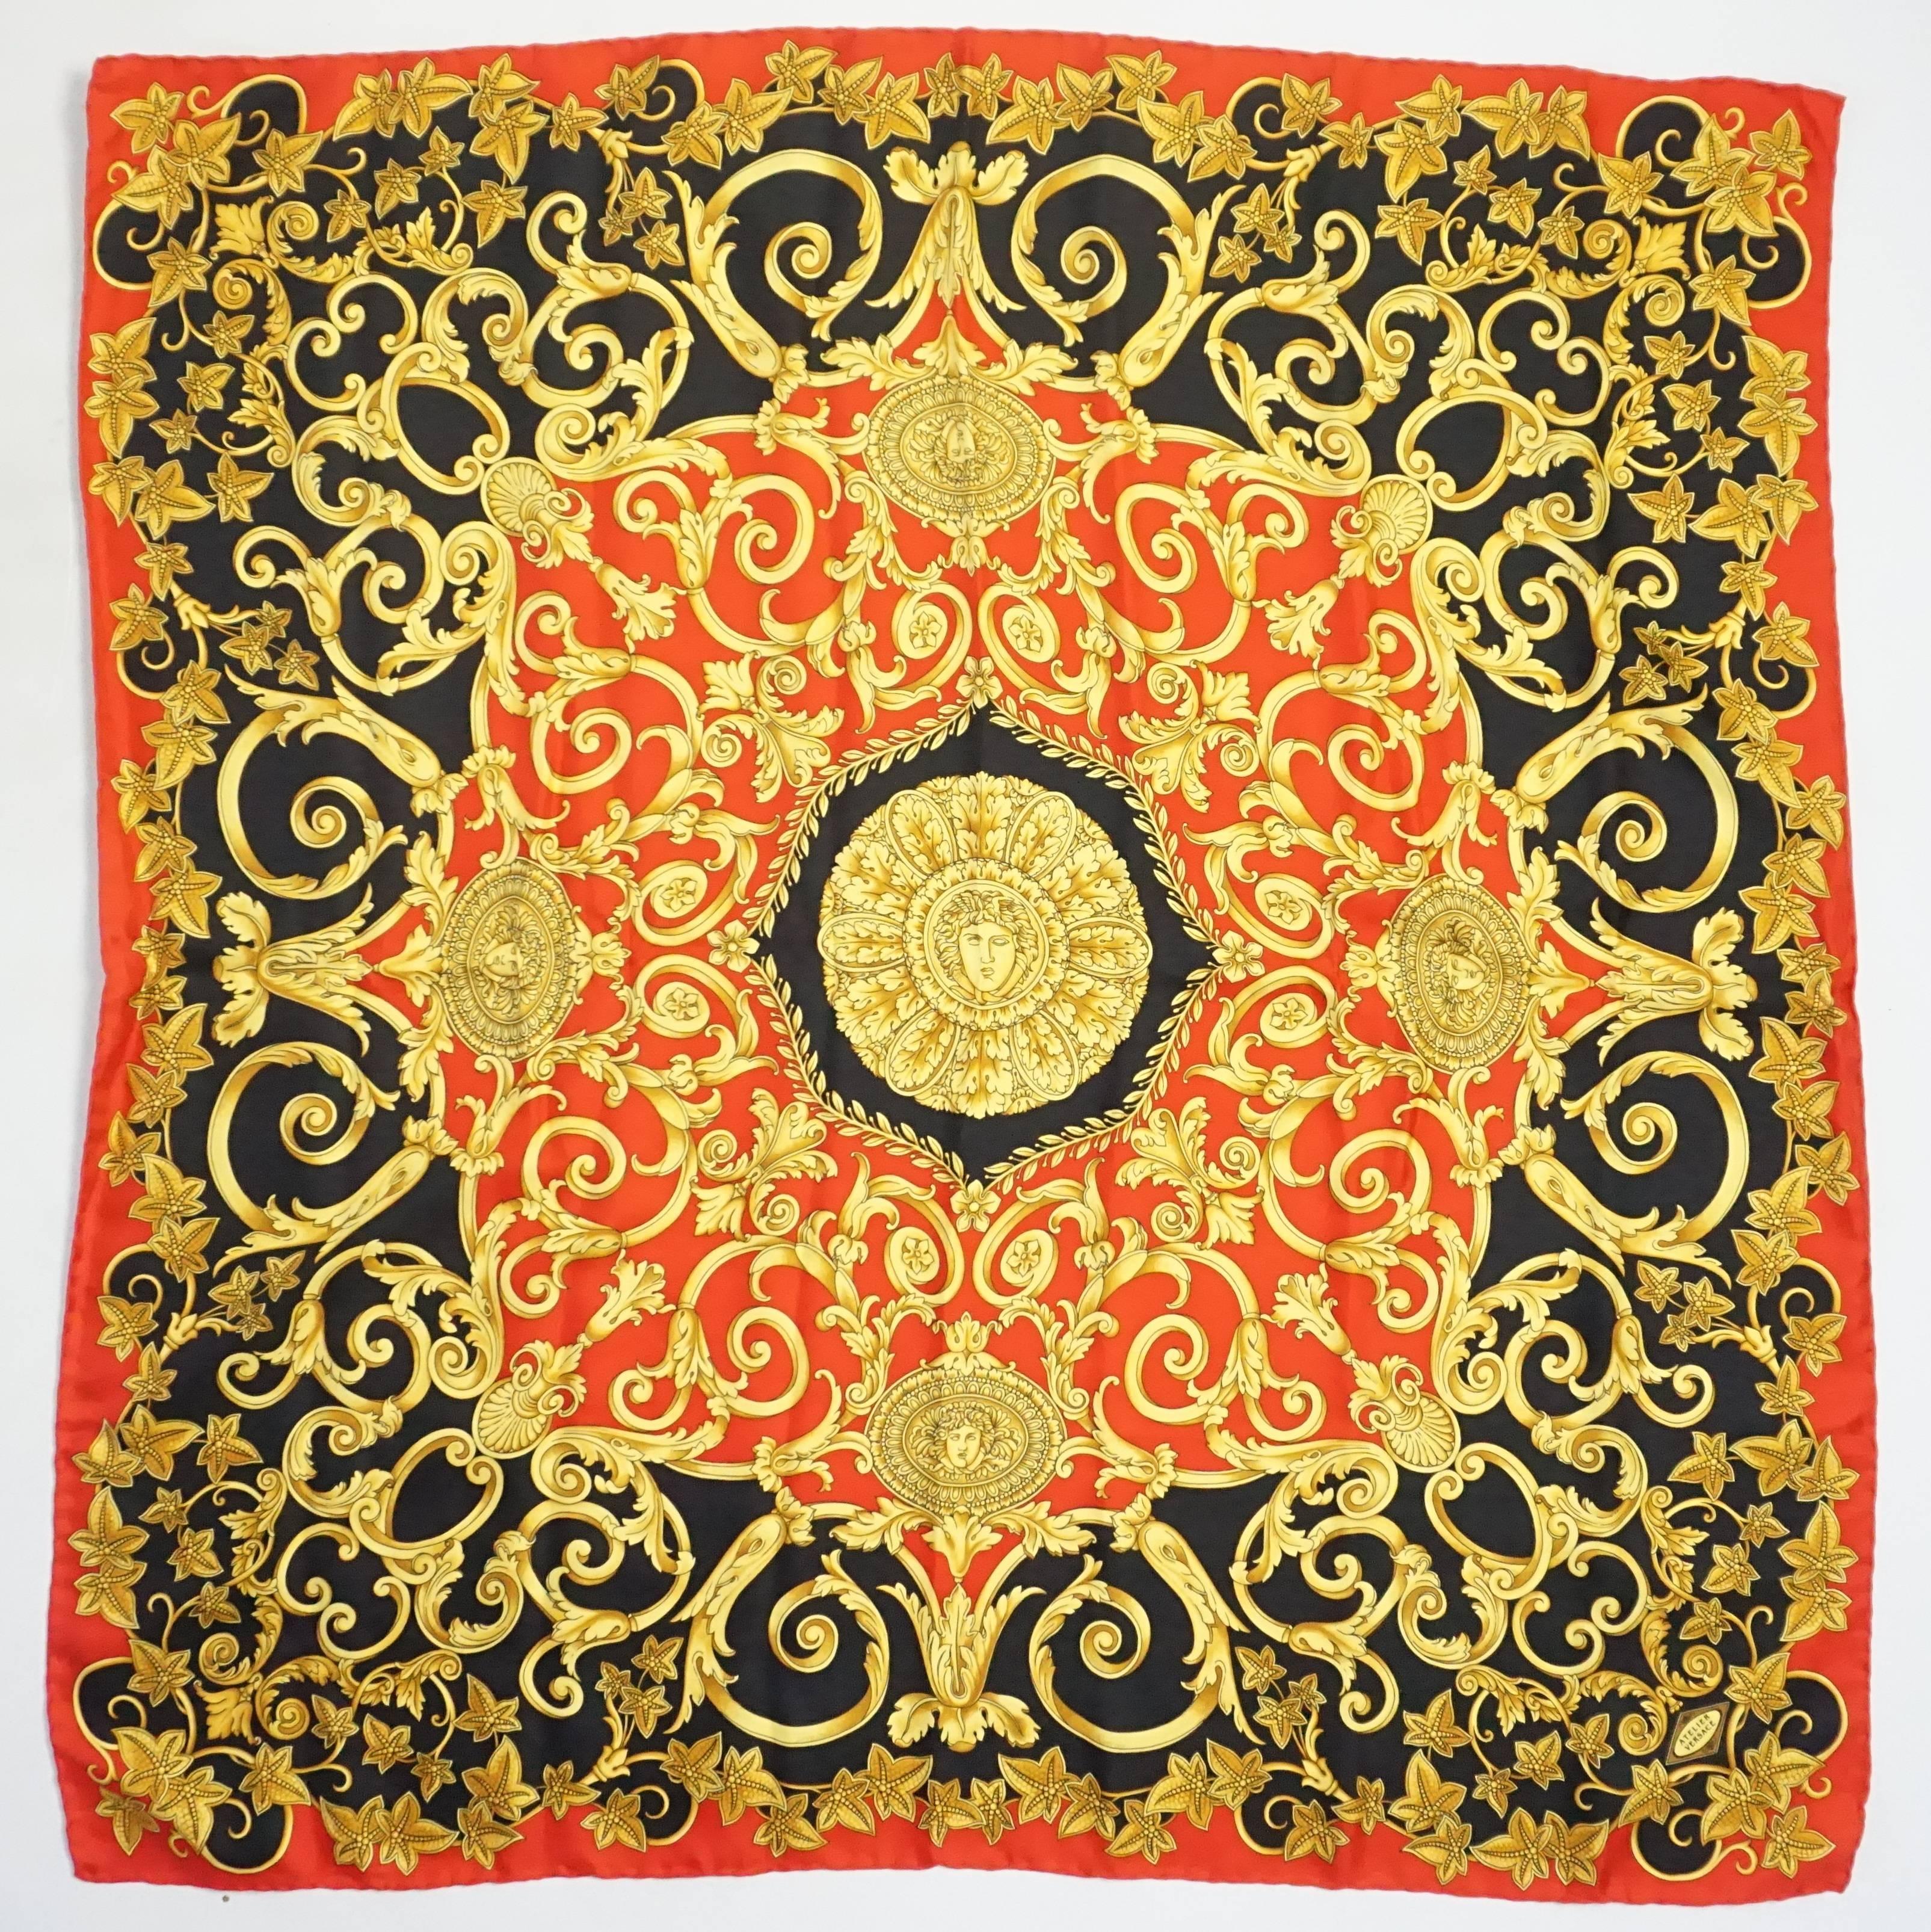 This Versace Atelier scarf is red and black with an intricate gold design and the Medusa head in the middle. It is silk and in excellent condition with a minor stain.

Measurements
Height: 34.75"
Width: 33.75"